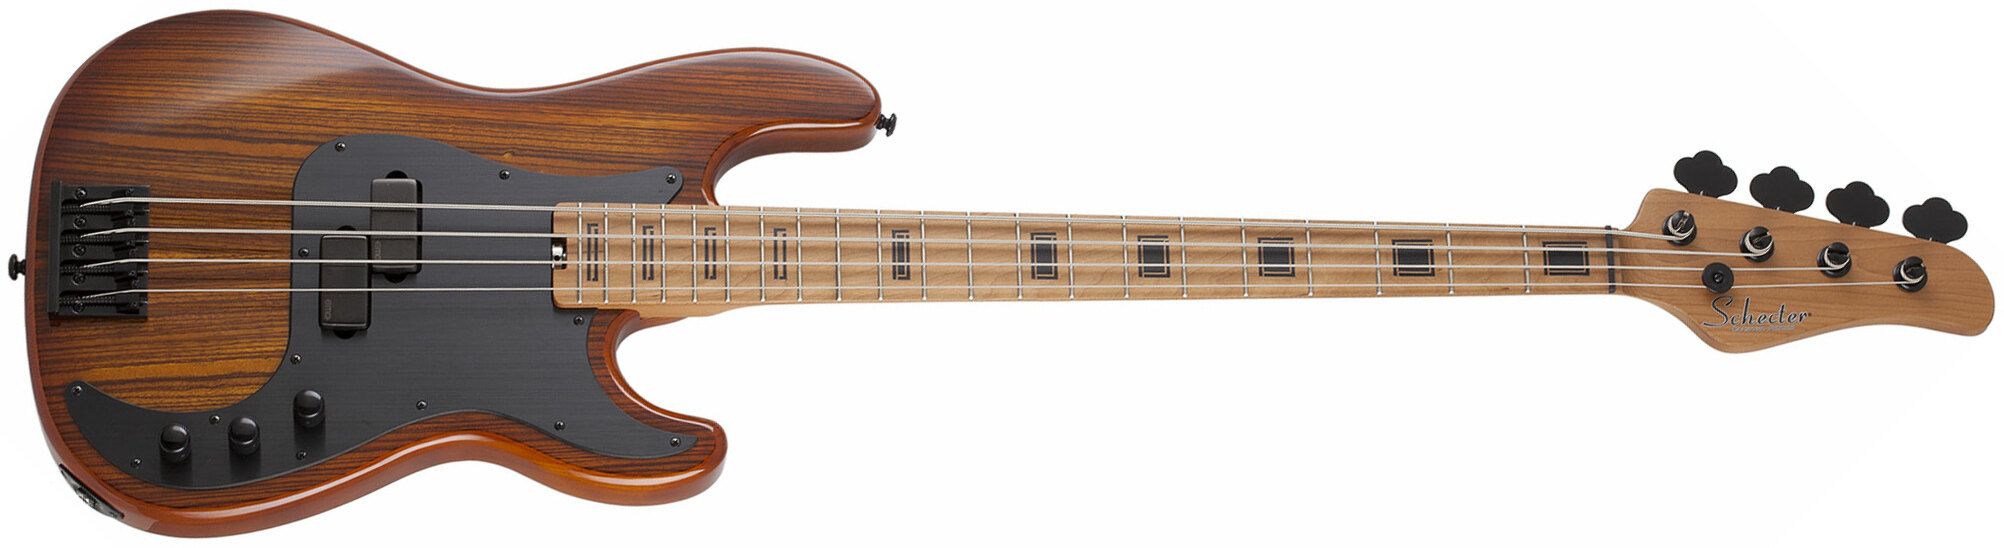 Schecter P-4 Exotic Active Emg Mn - Faded Vintage Sunburst - Solidbody E-bass - Main picture